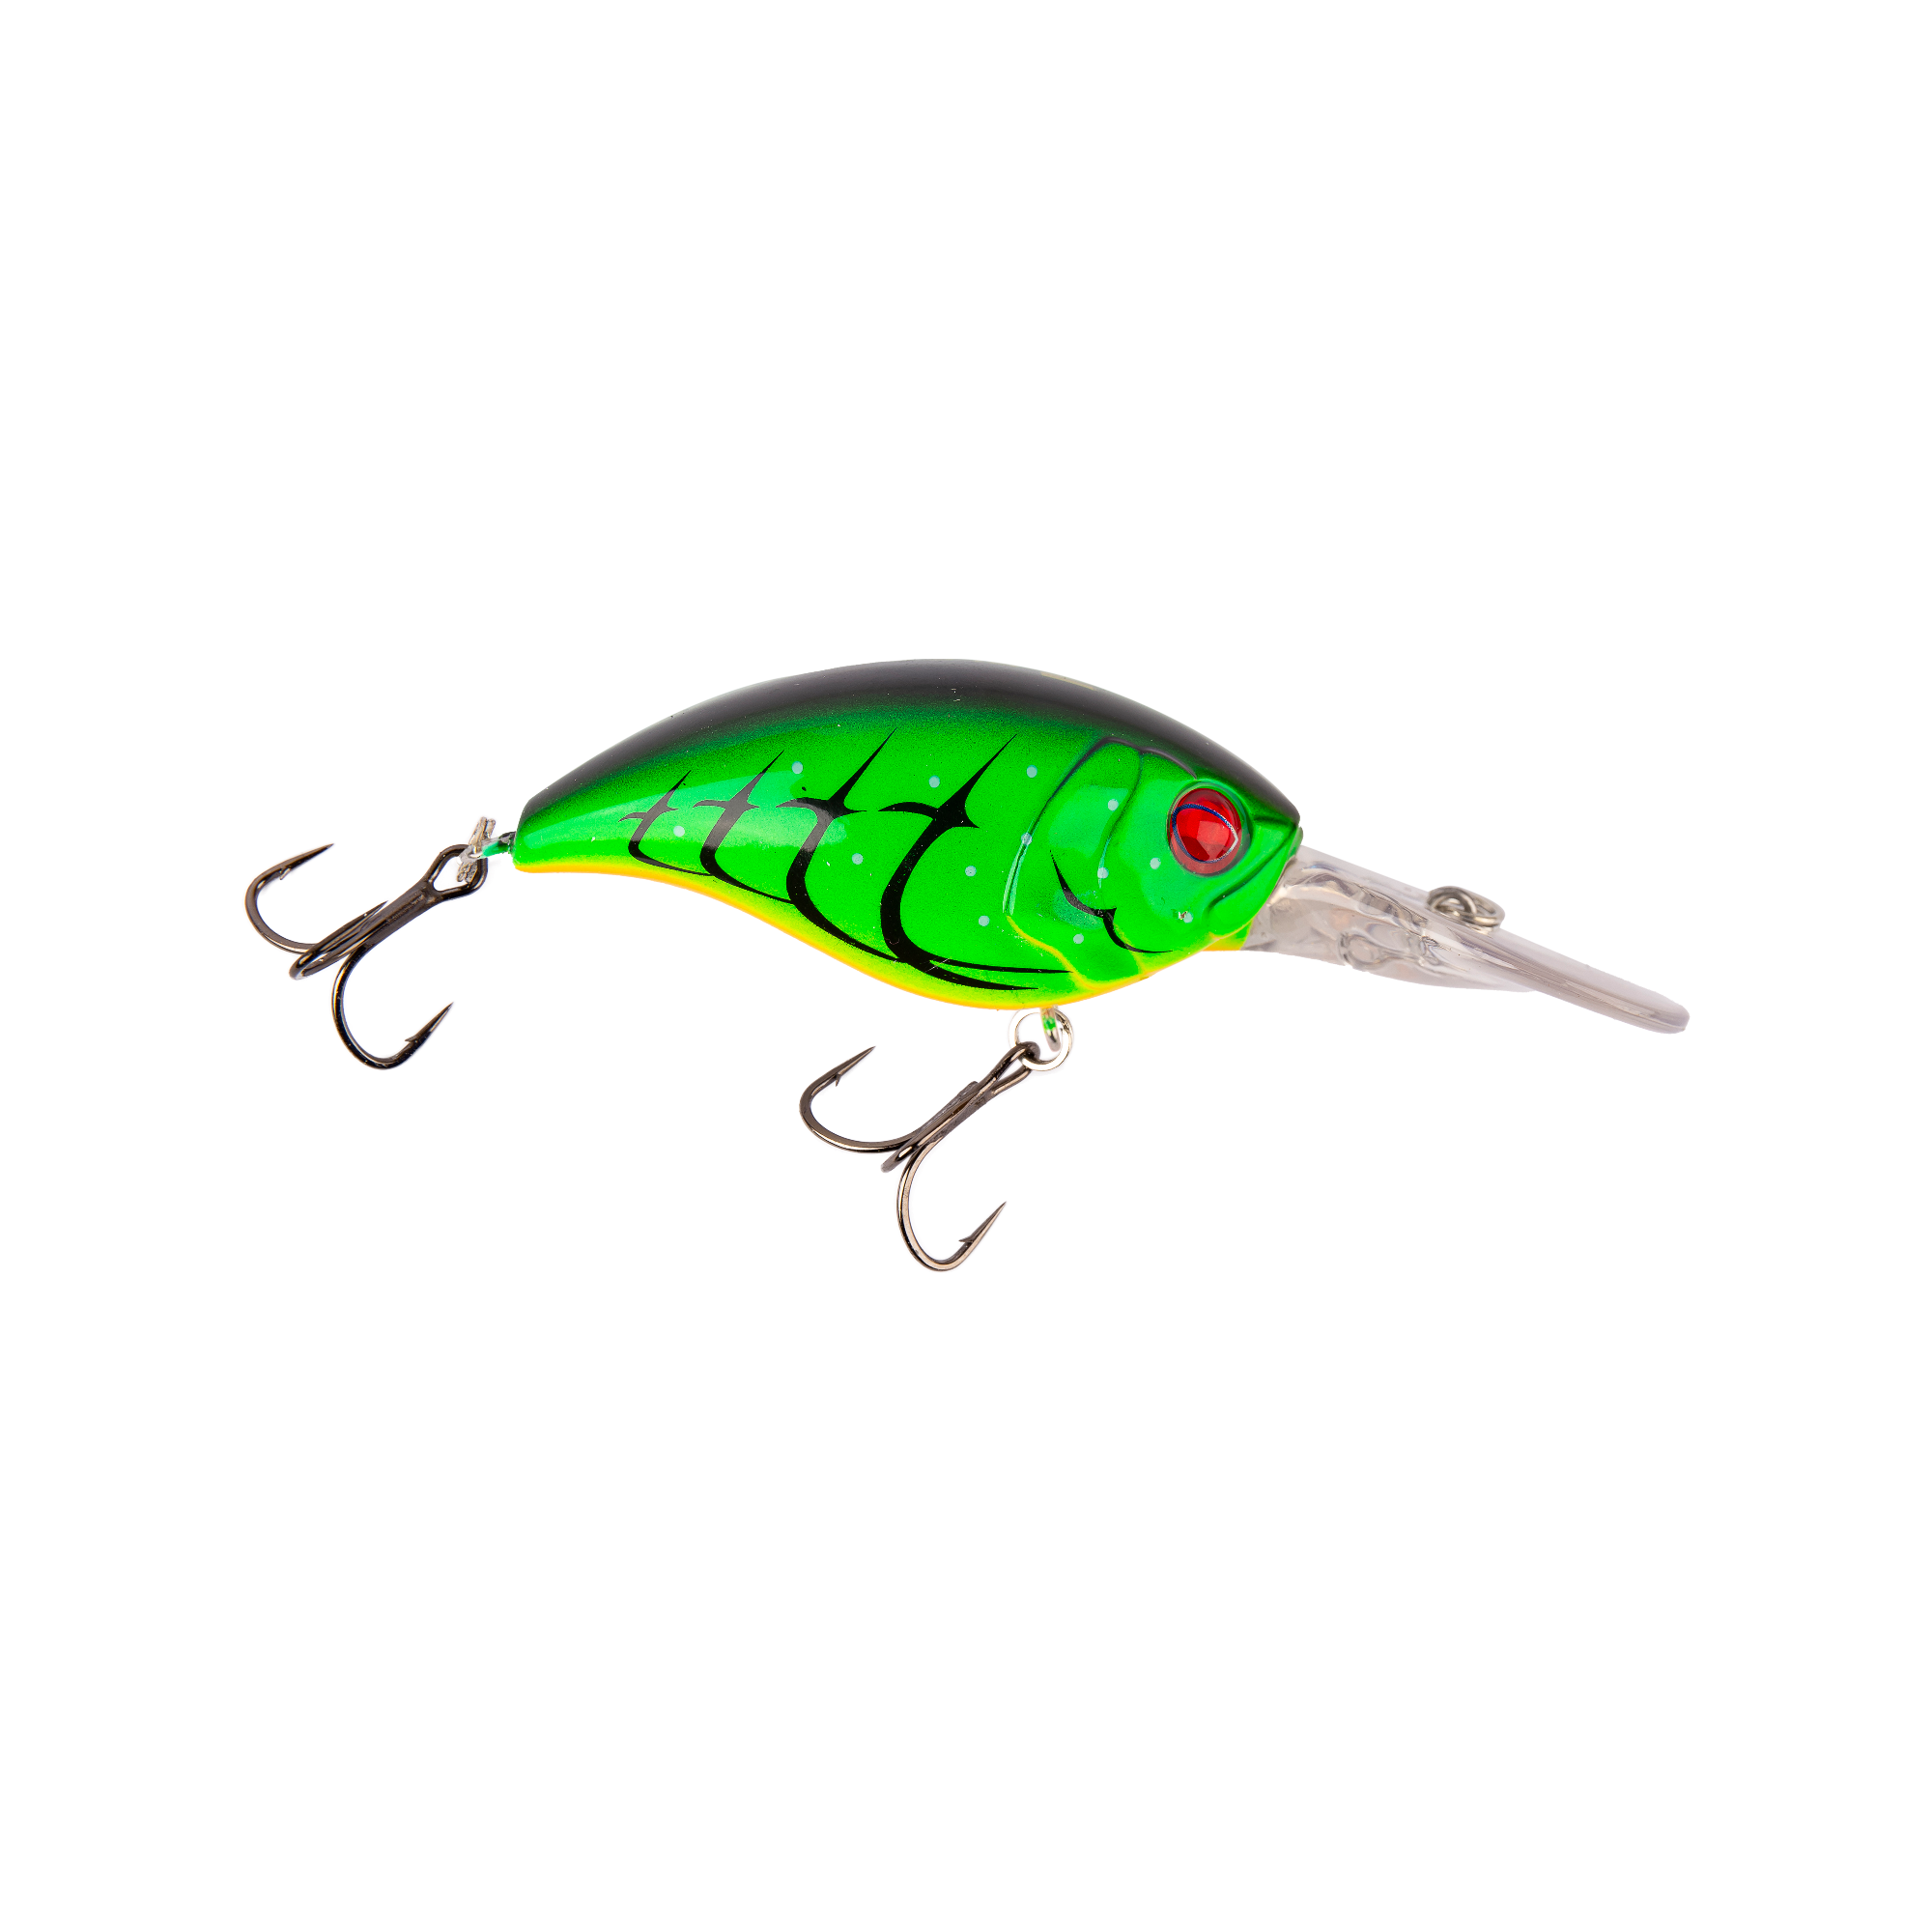 Norman Bass Freshwater Fishing Baits, Lures & Flies for sale